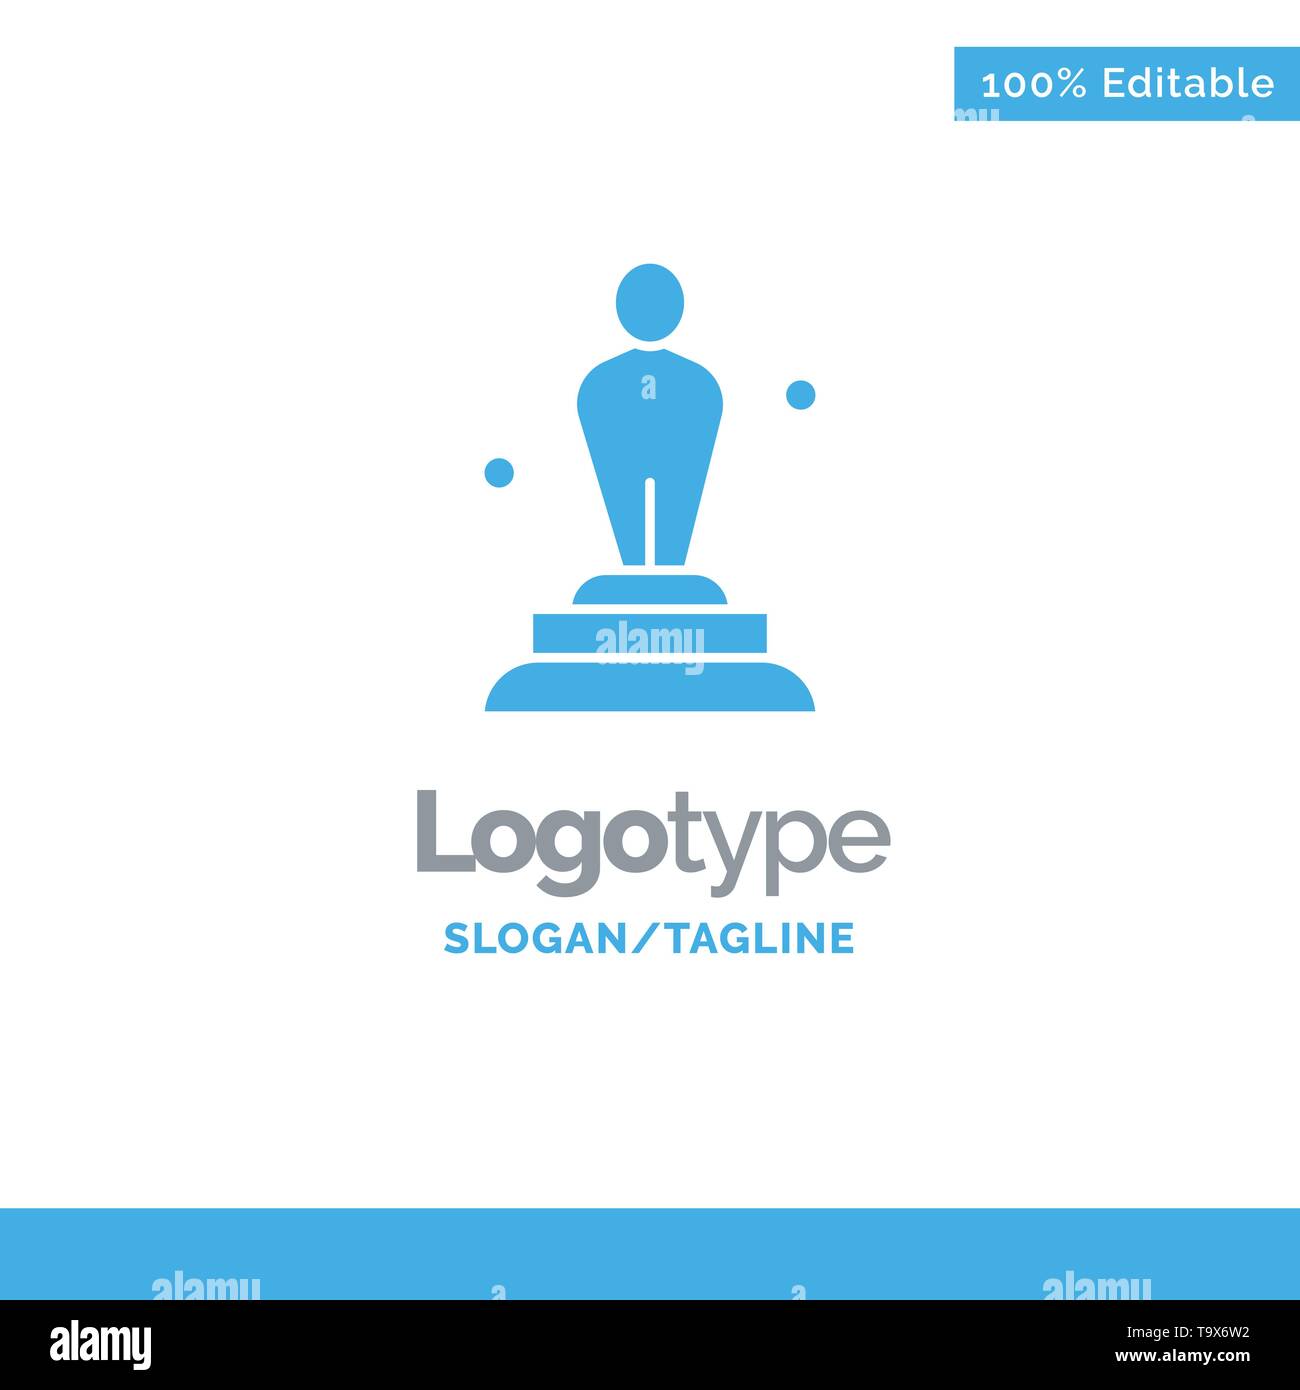 Academy, Award, Oscar, Statue, Trophy Blue Solid Logo Template. Place for Tagline Stock Vector